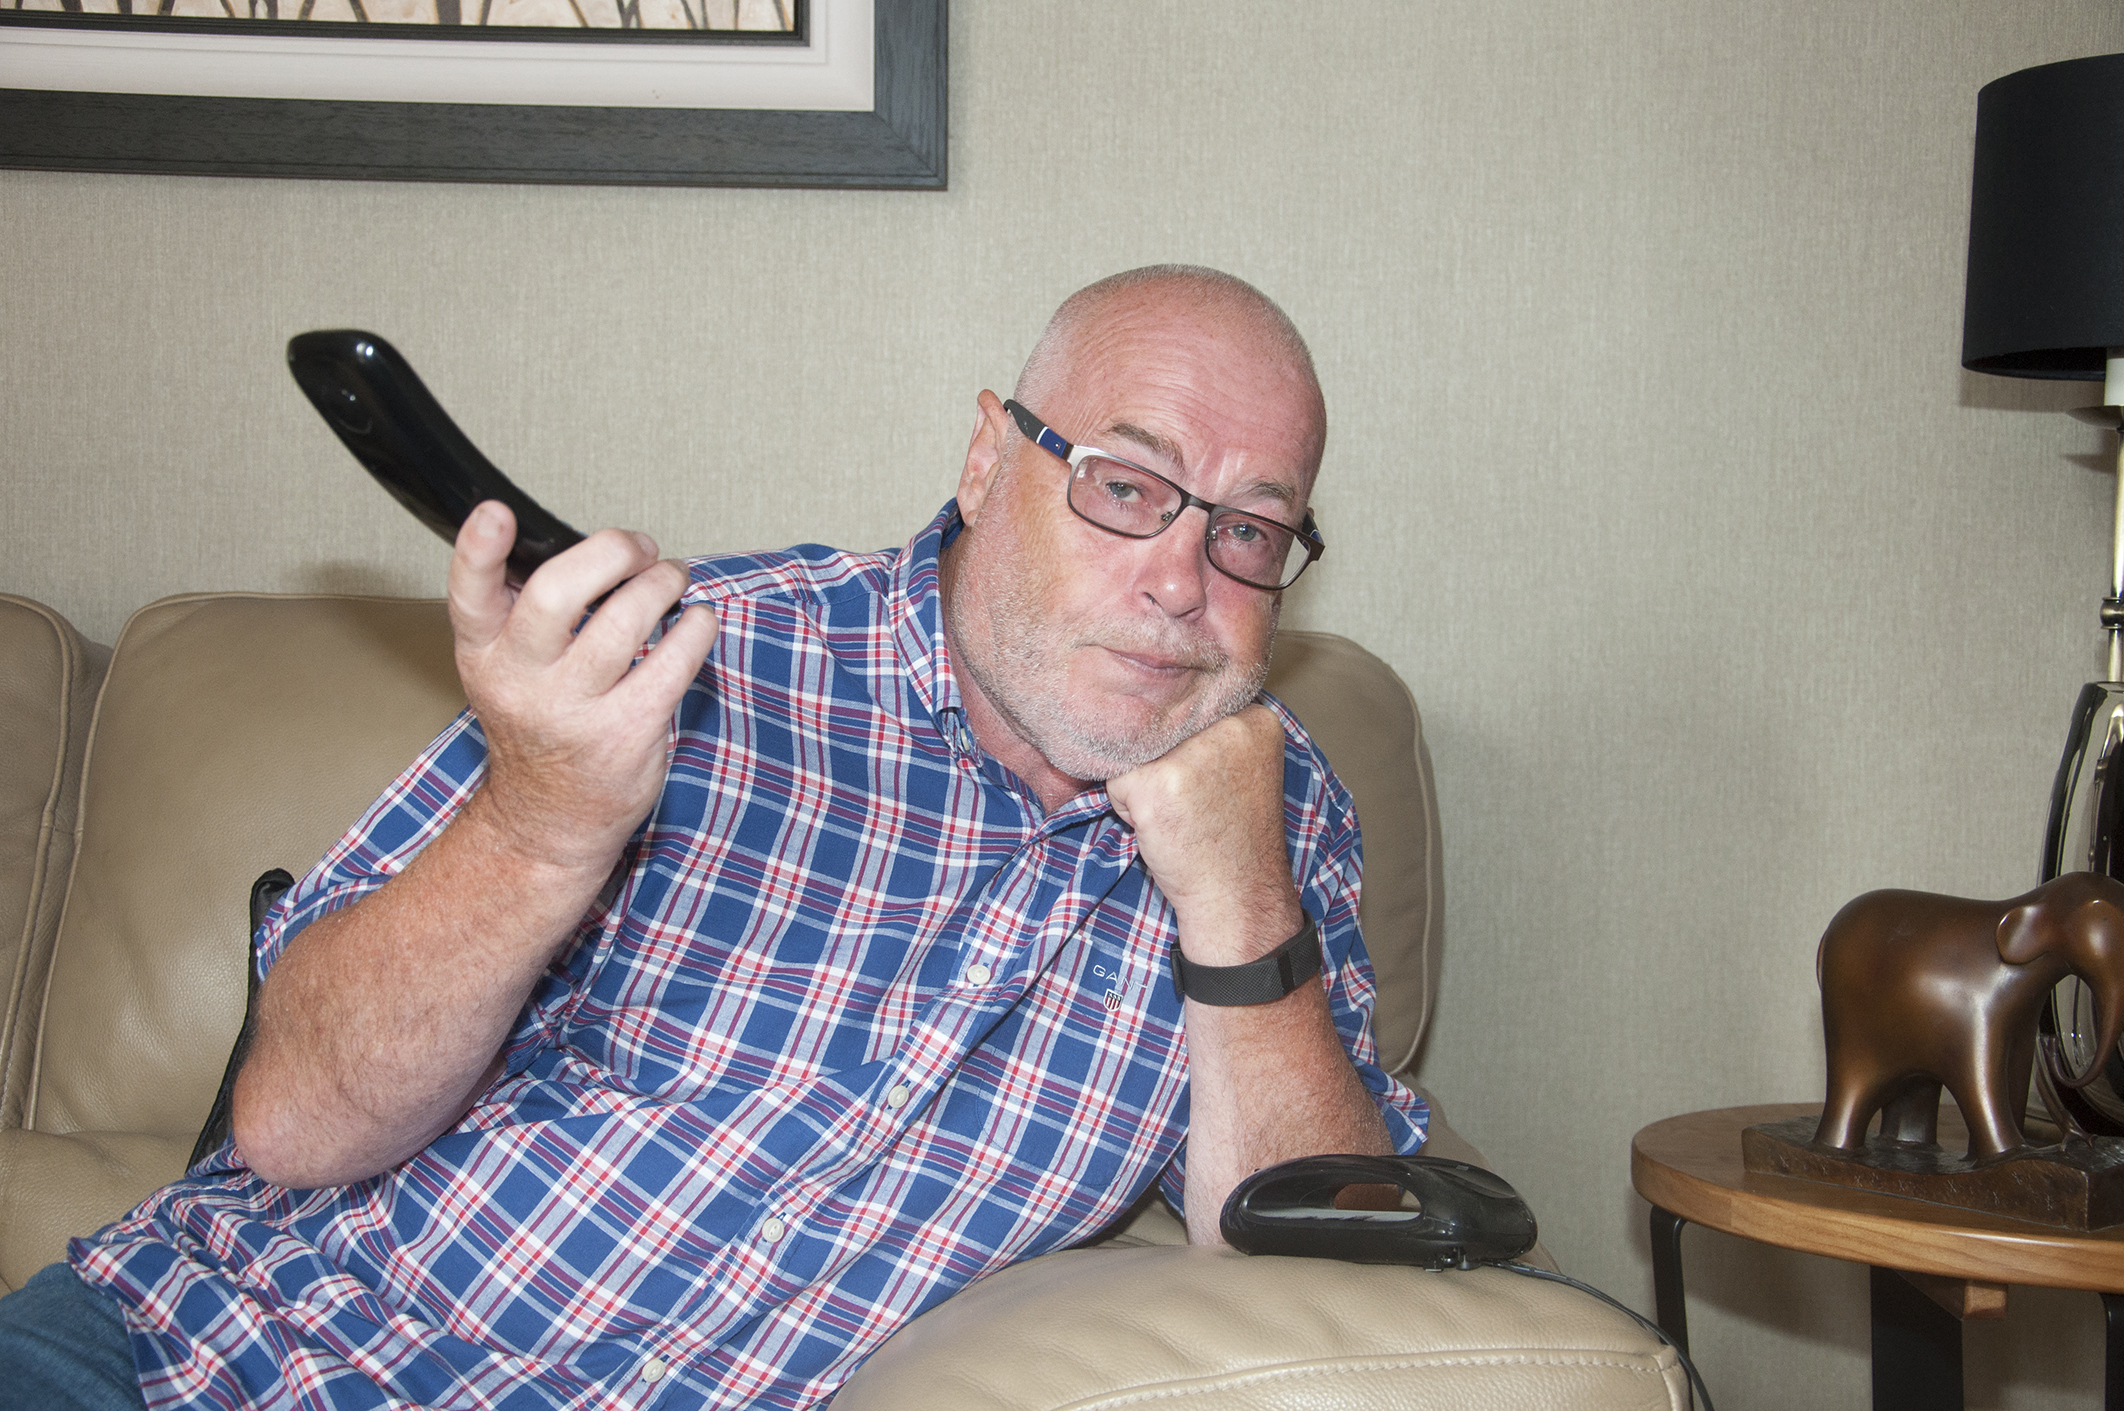 Hanging up - Councillor David Fairweather has been left disgusted by the tales of nuisance callers.